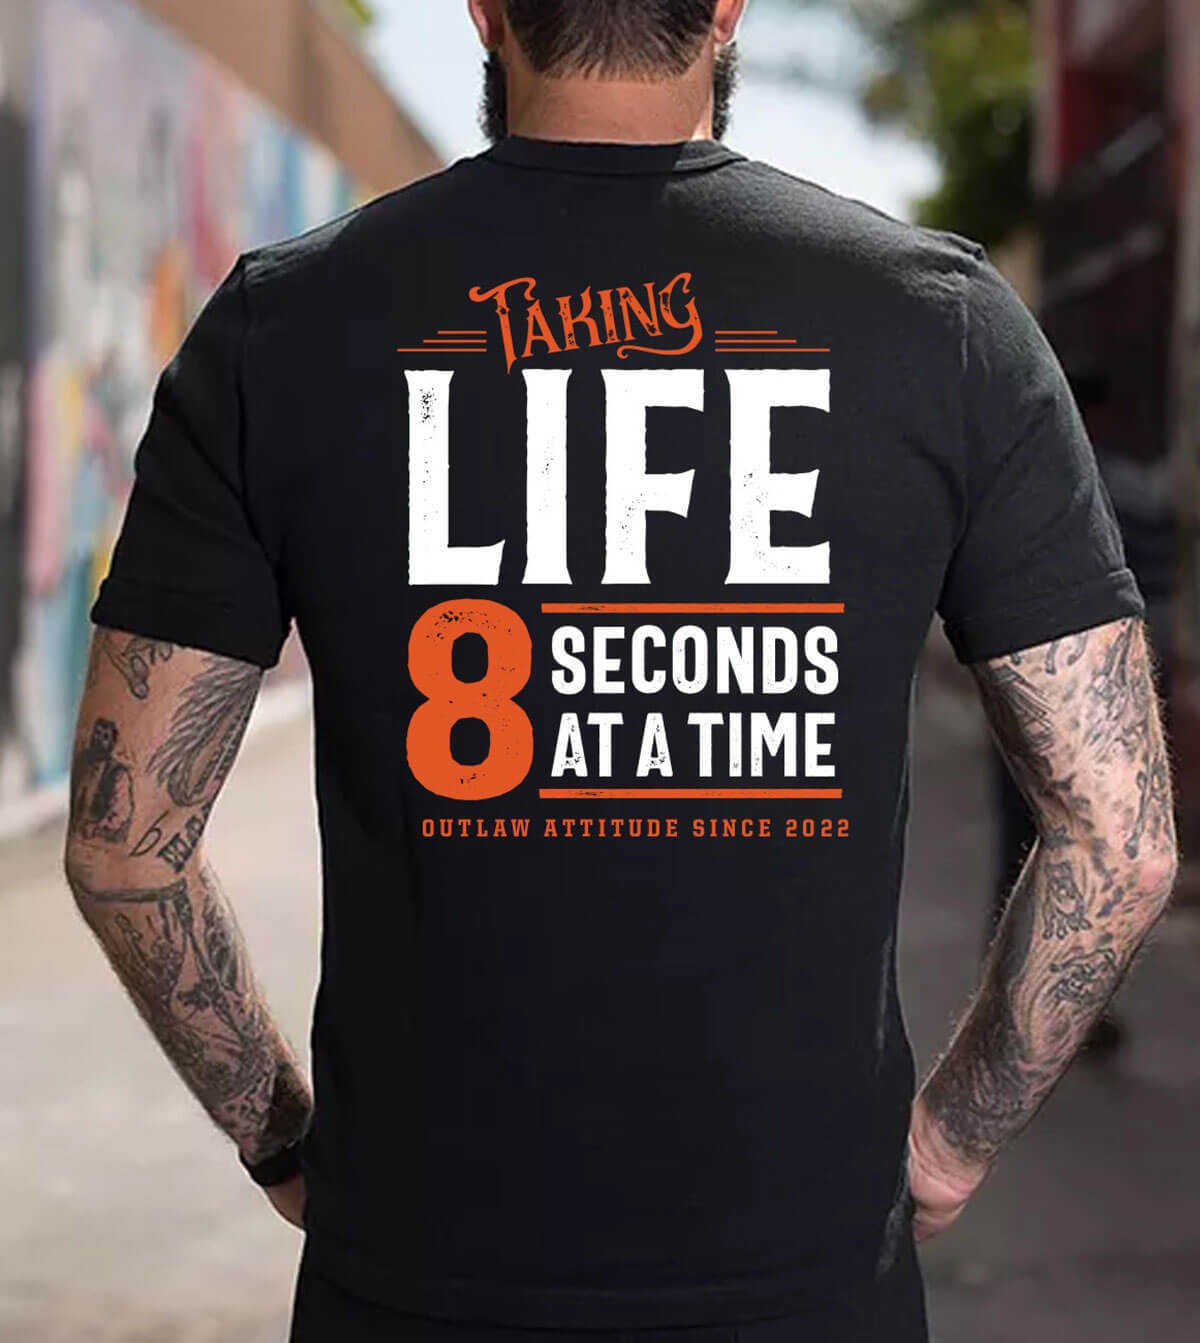 Back view of the black "Taking Life 8 Seconds at a Time" T-Shirt